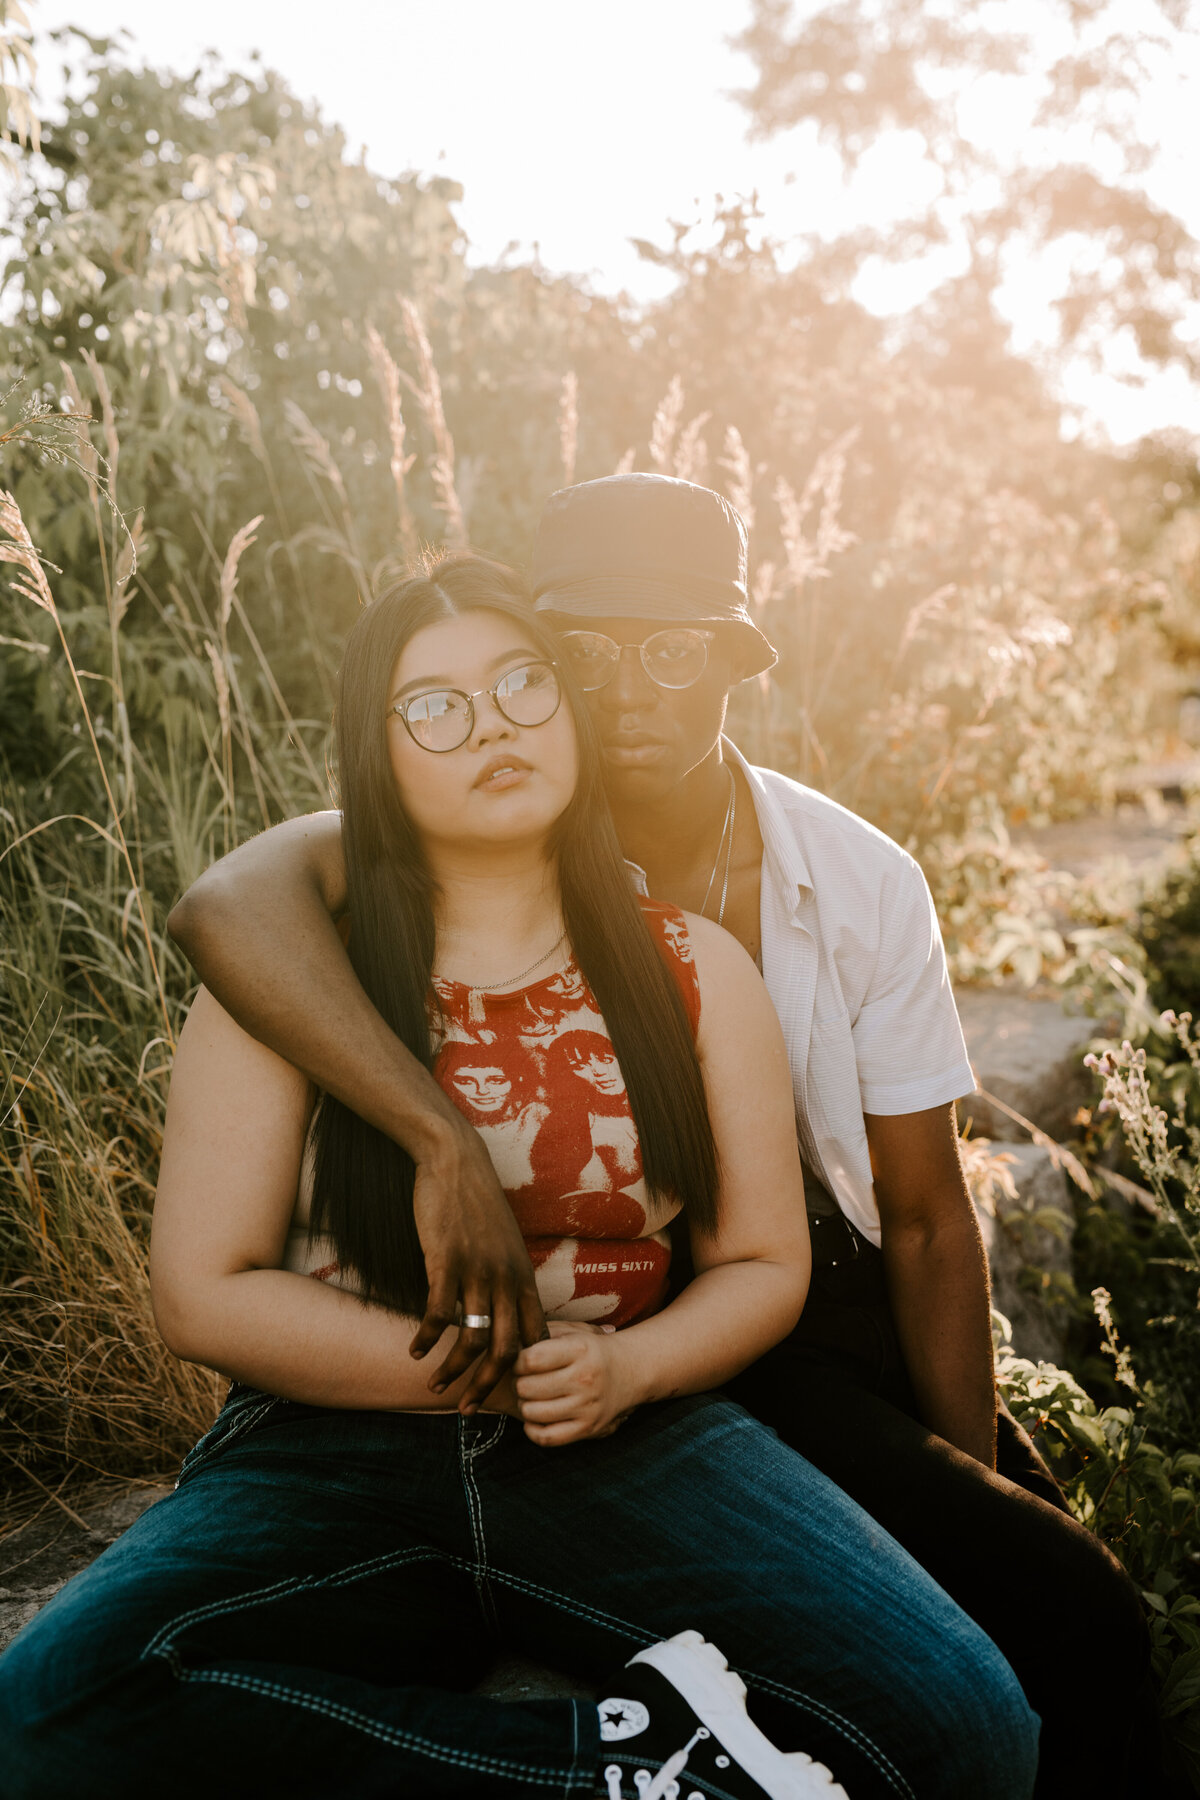 toronto-couples-session-queen-west-99-sudbury-summer-vibes-37